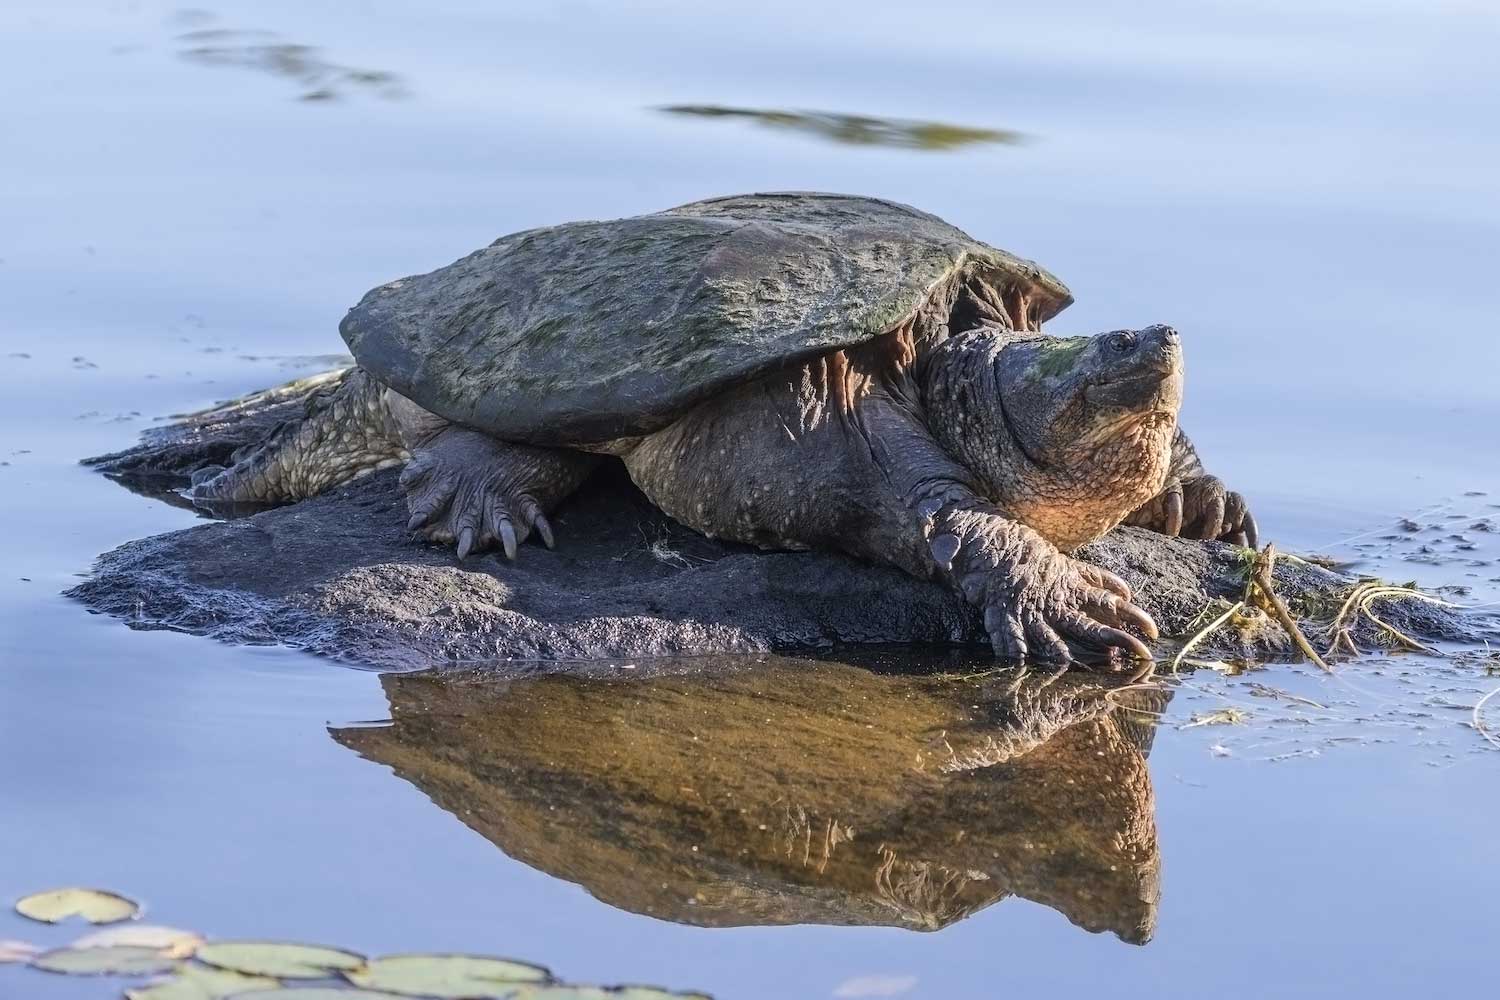 Common snapping turtle sitting on a mound in the water.